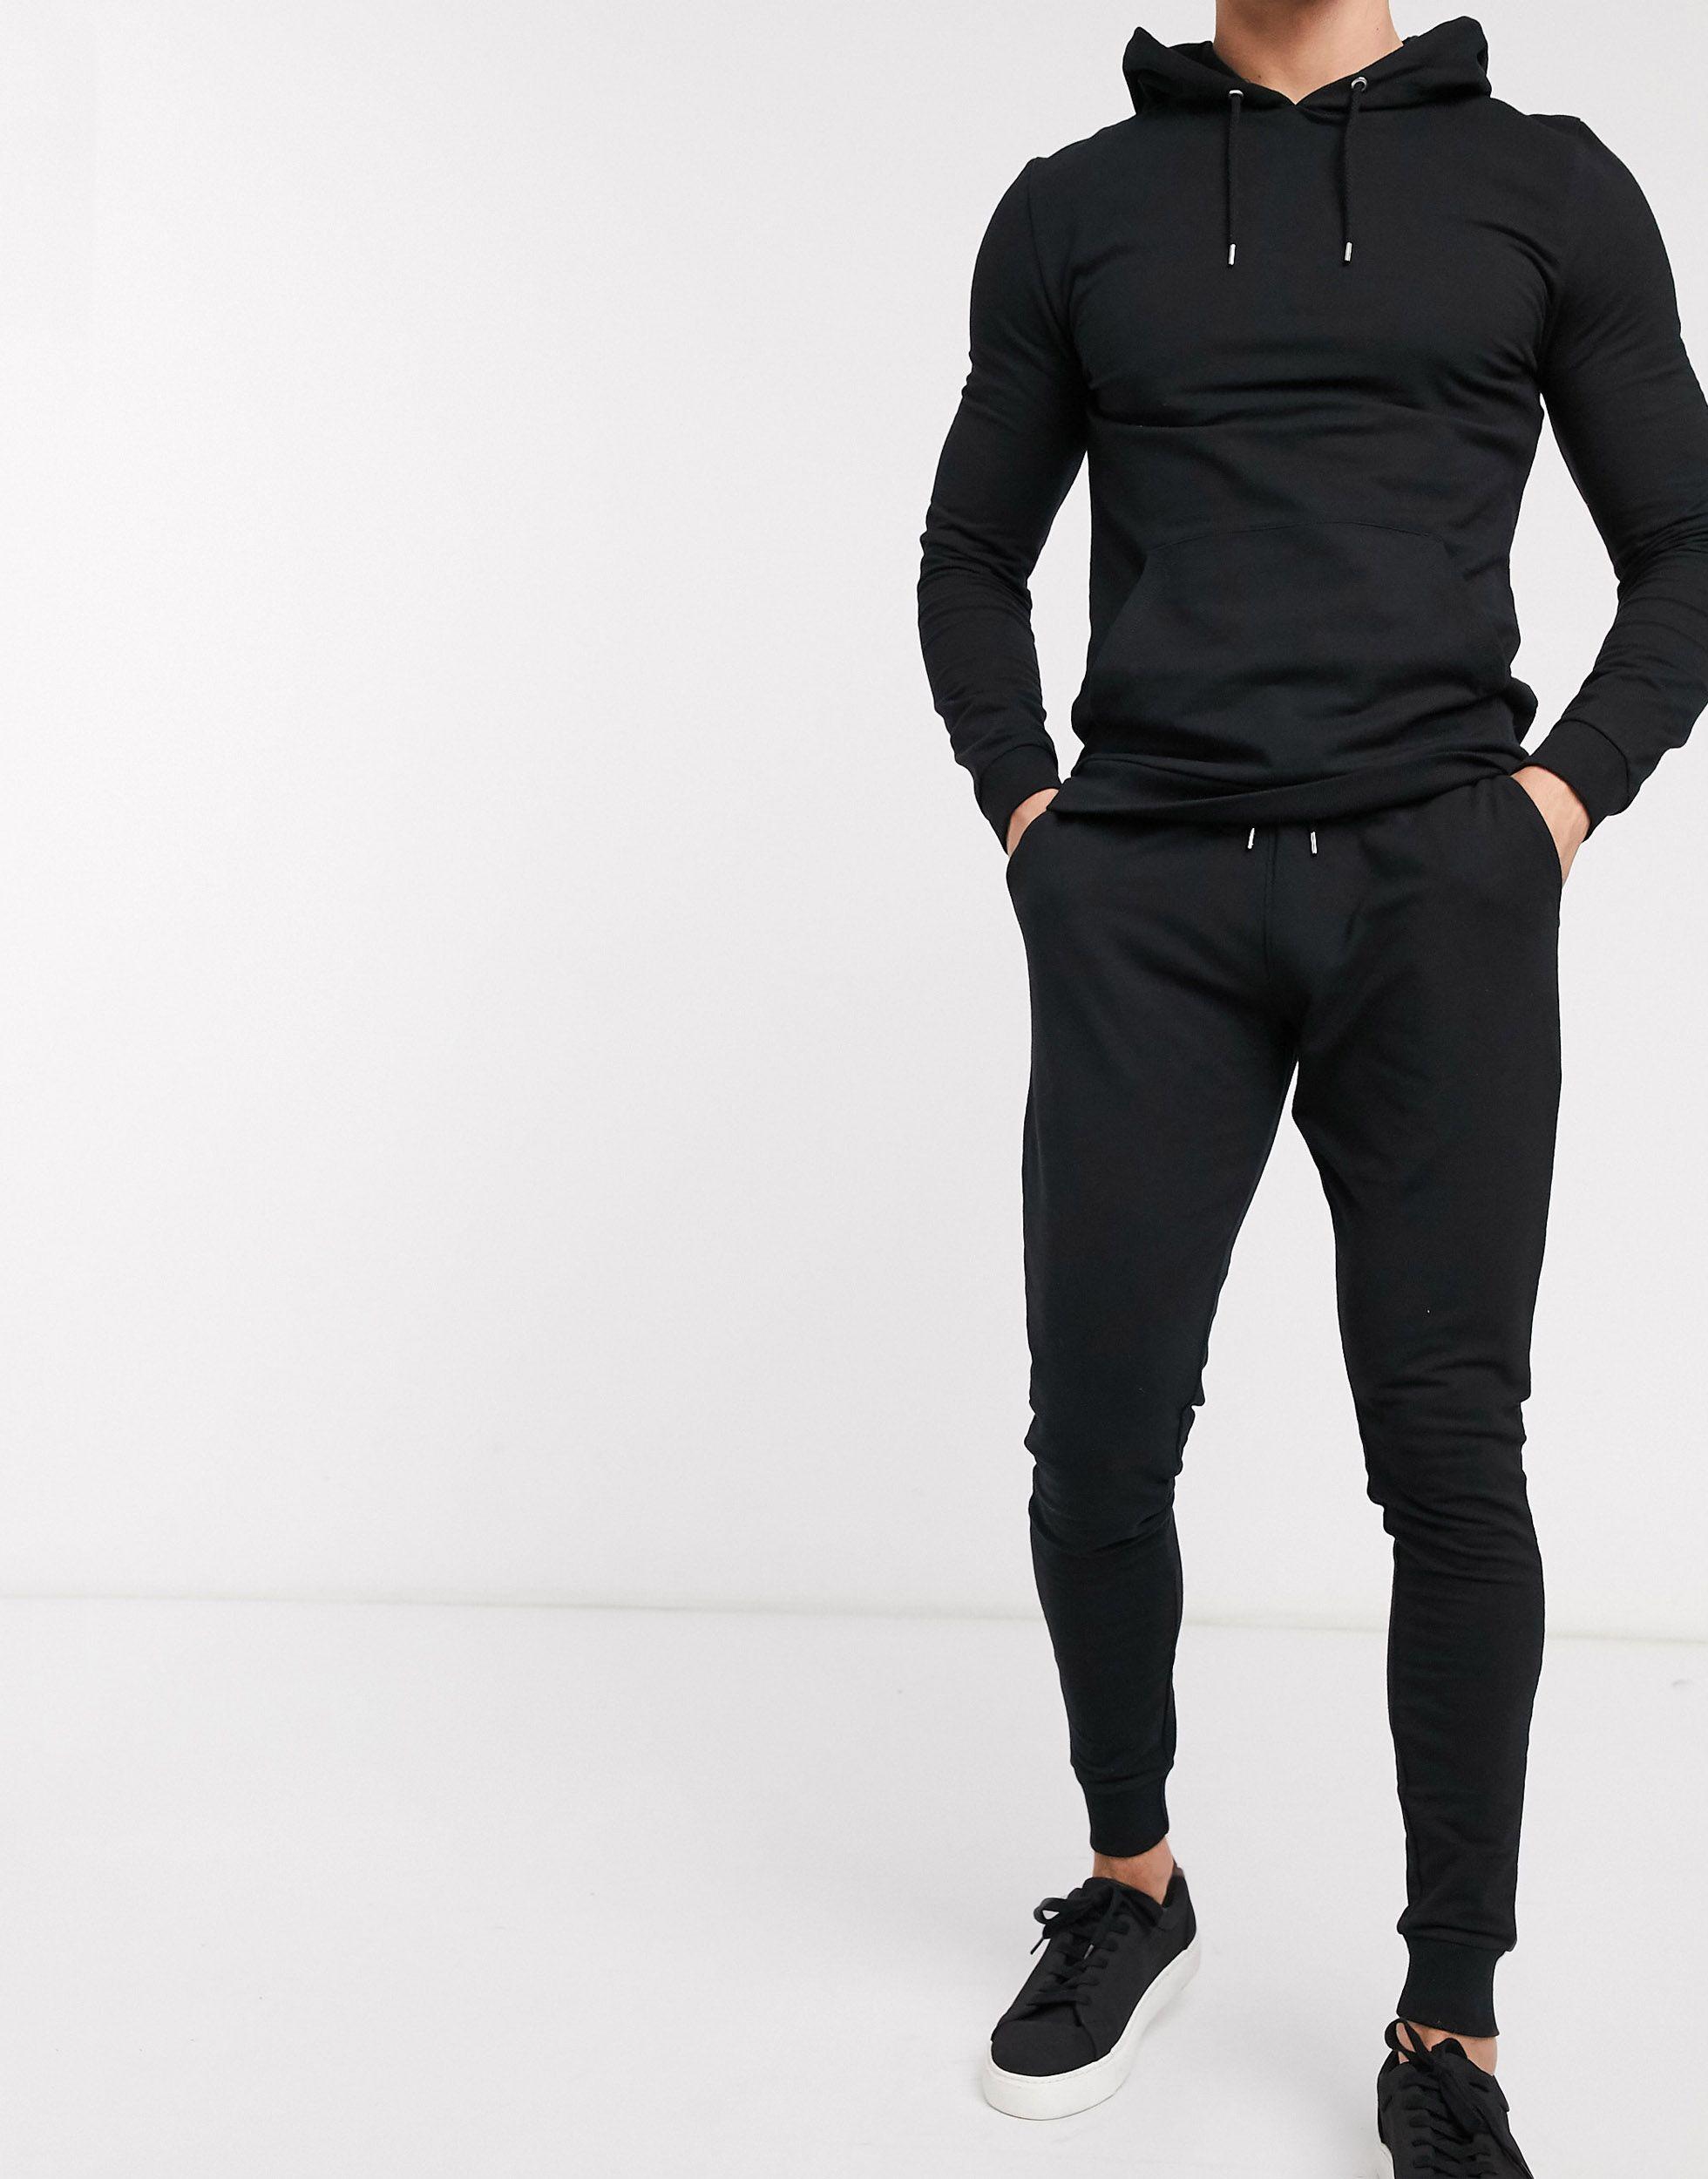 ASOS Denim Muscle Tracksuit With Hoodie & Extreme Super Skinny joggers in  Black for Men - Lyst